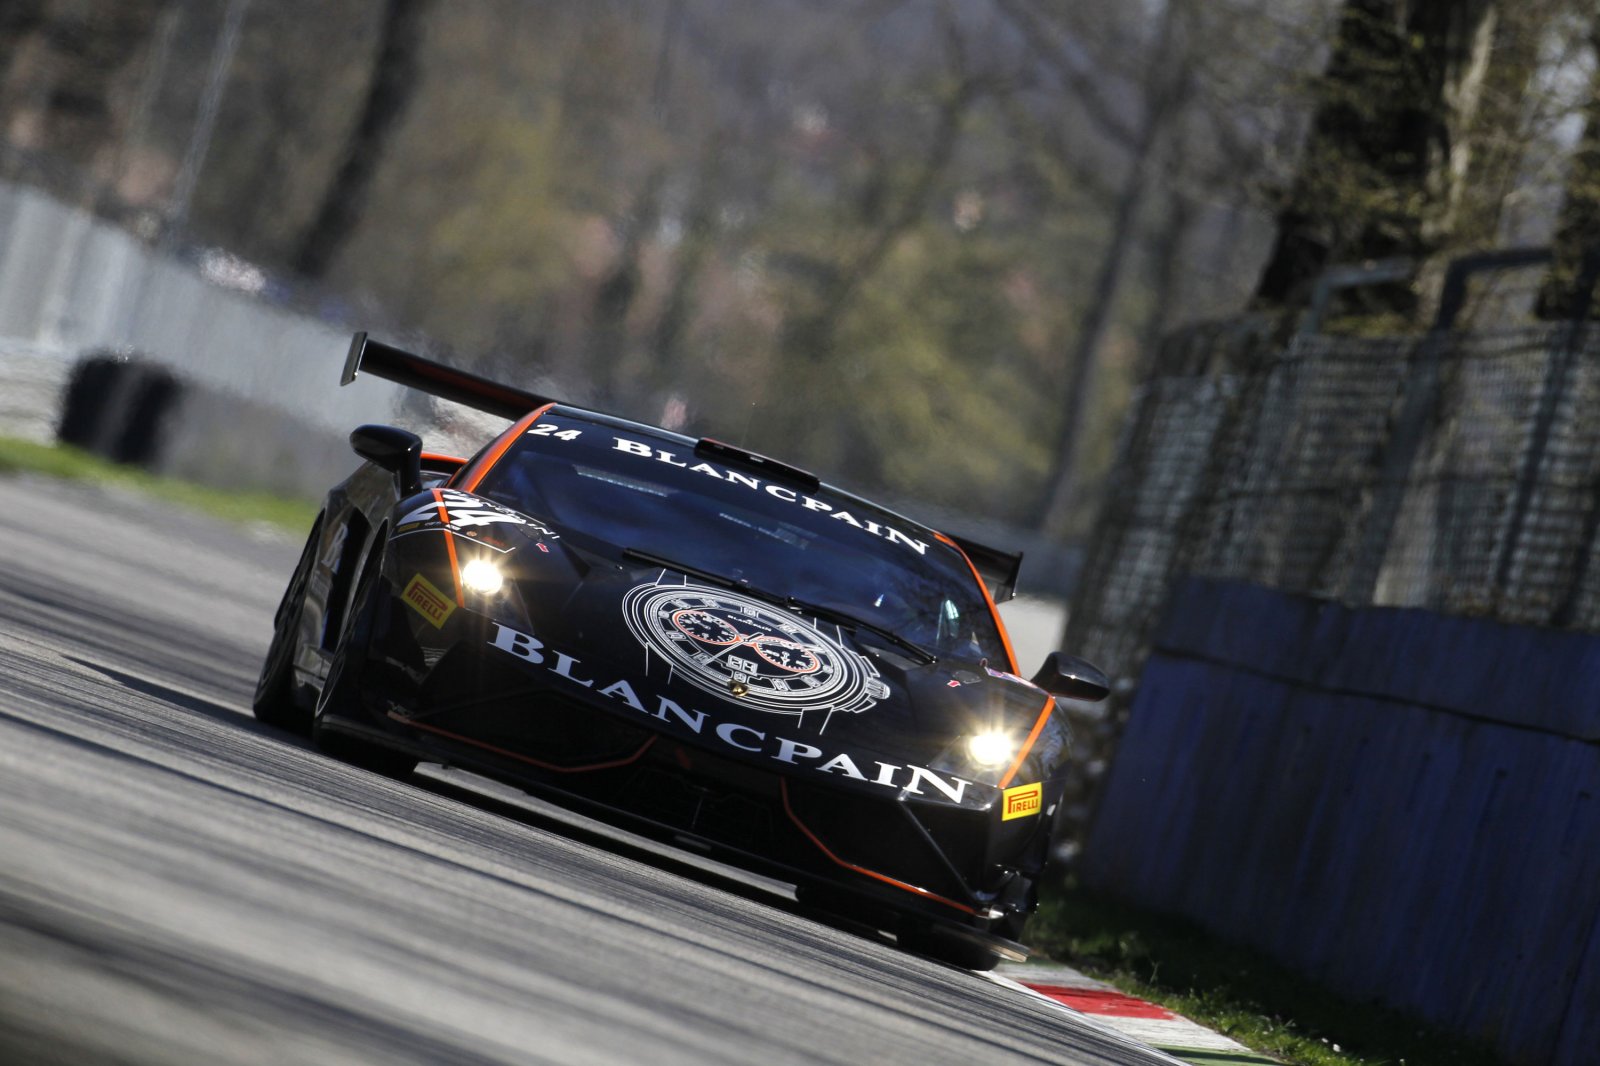 66 cars on the Blancpain GT Series grids